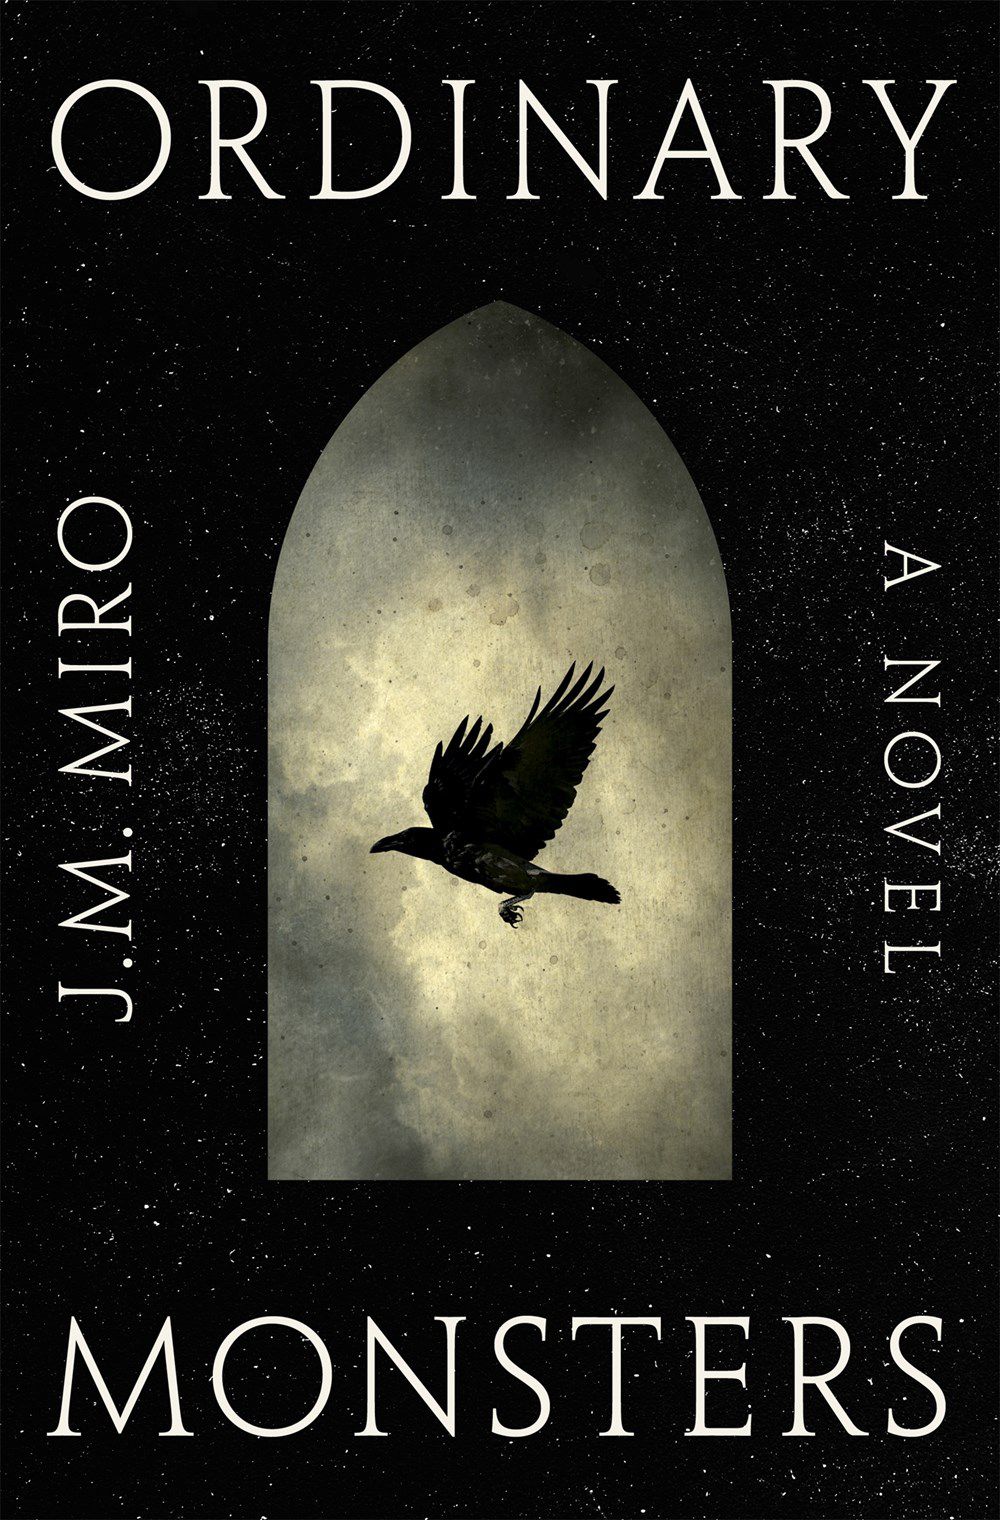 Cover image for Ordinary Monsters by JM Miro, featuring a black bird flying against a backdrop of both clouds and the night sky.